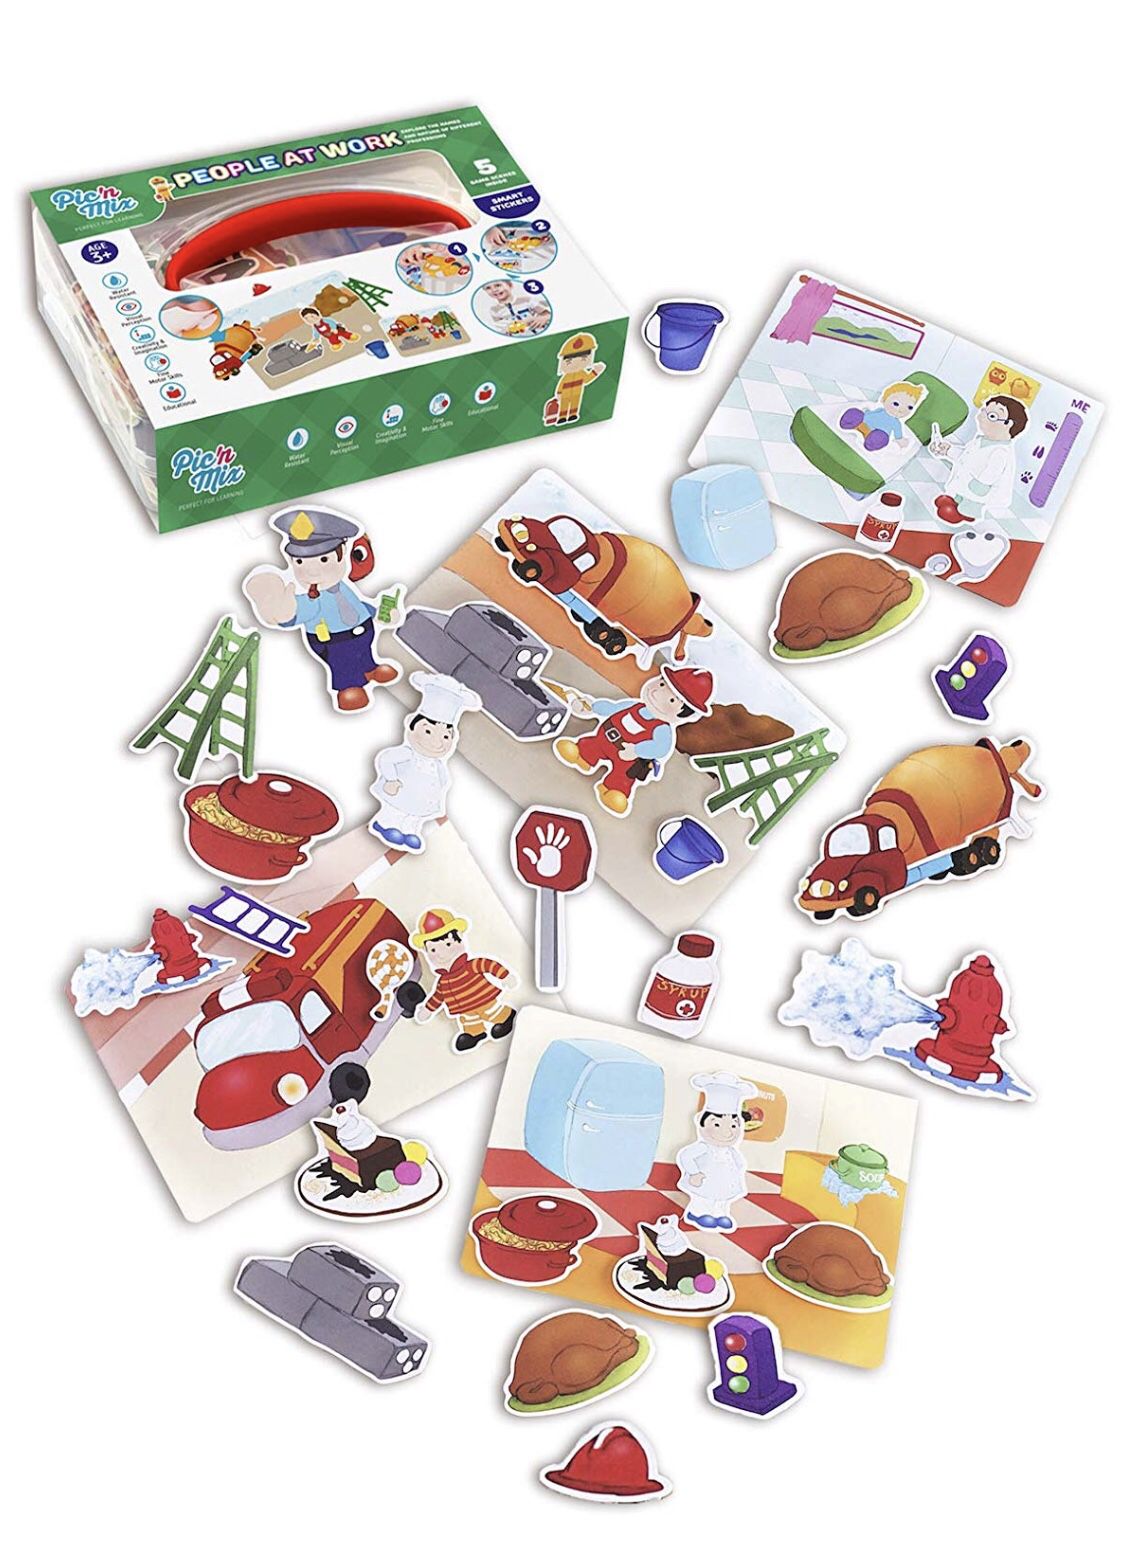 People at Work games for toddlers 3 years old. Picnmix board games for kids 3 and up. Educational puzzles and stickers for baby - Eco-Friendly Plasti